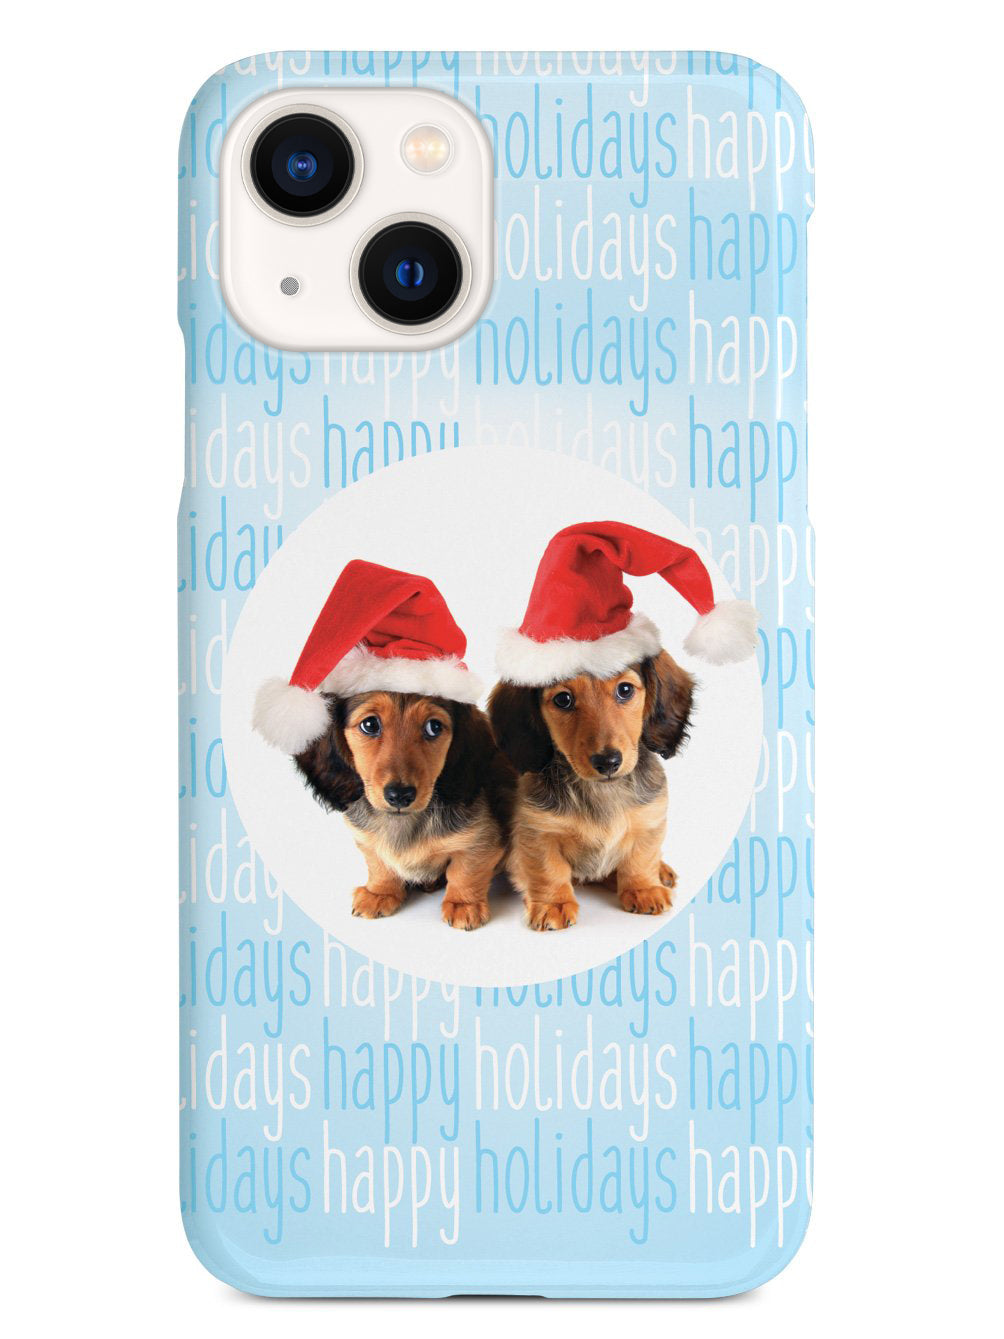 Weiner Dogs - Happy Holiday Dachshunds Case